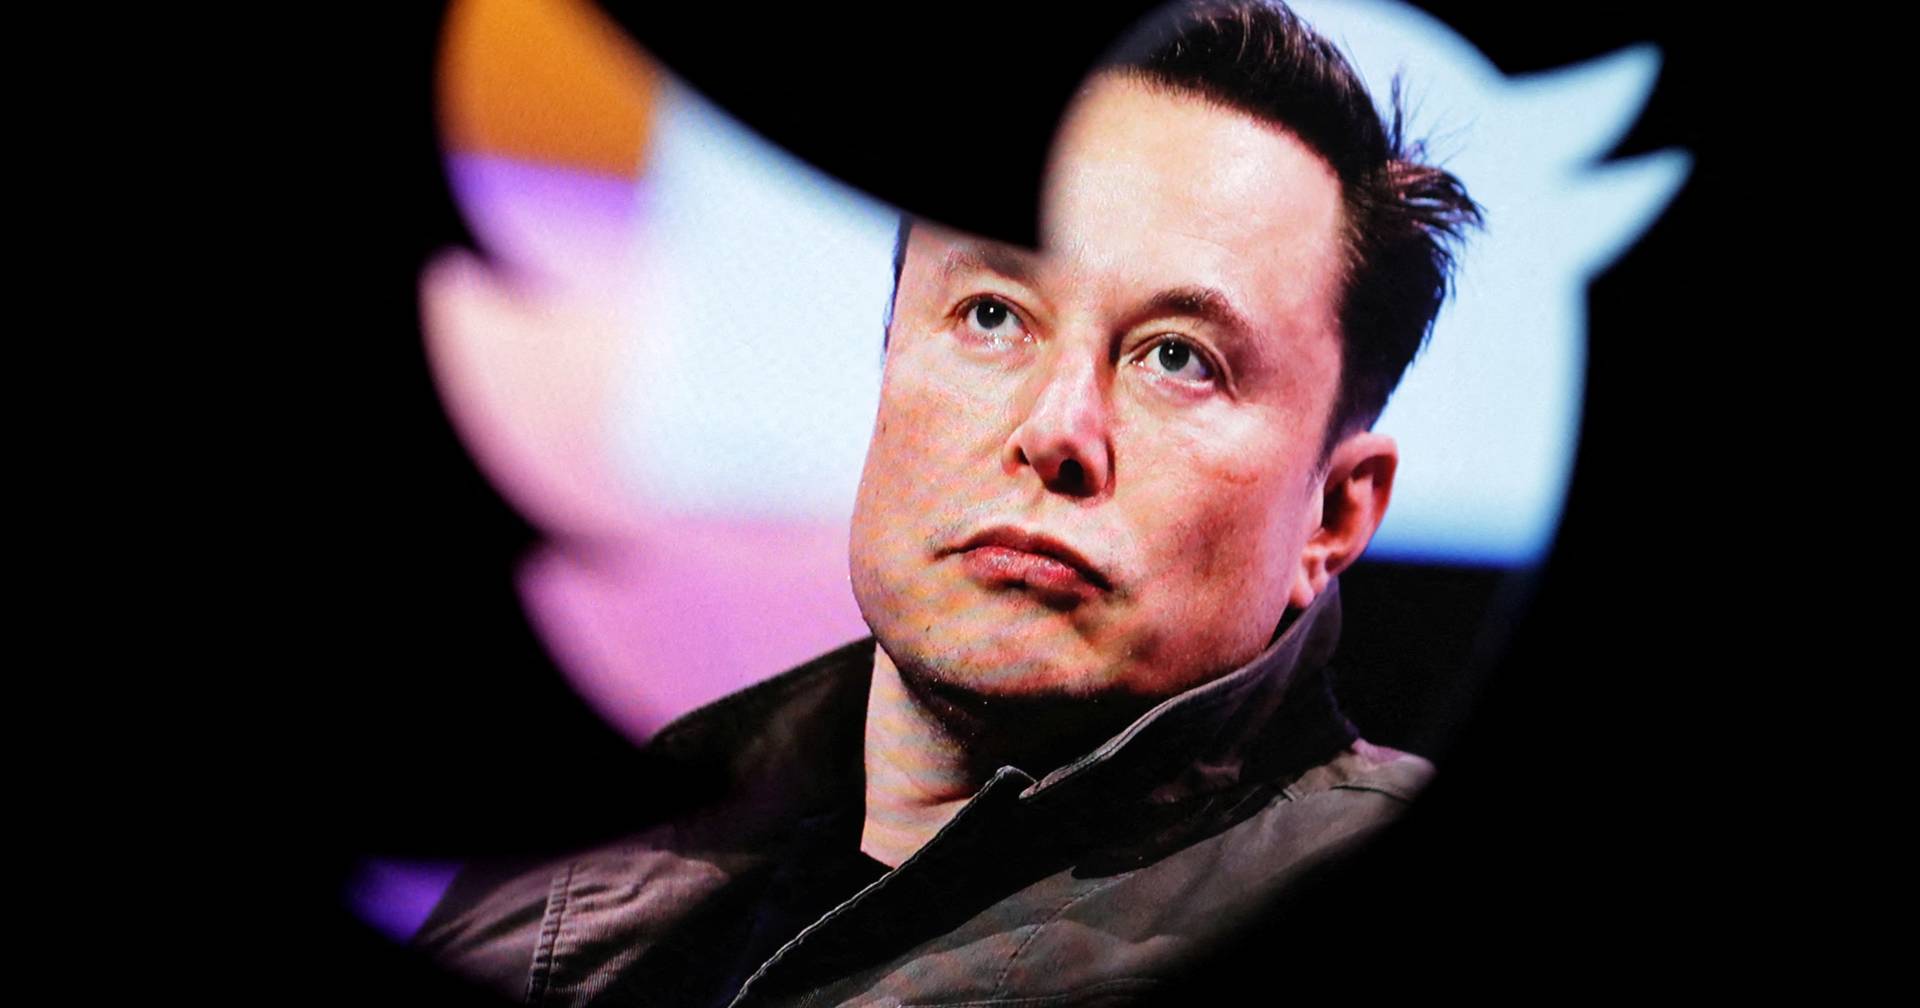 Elon Musk announces that only verified accounts will be recommended on Twitter